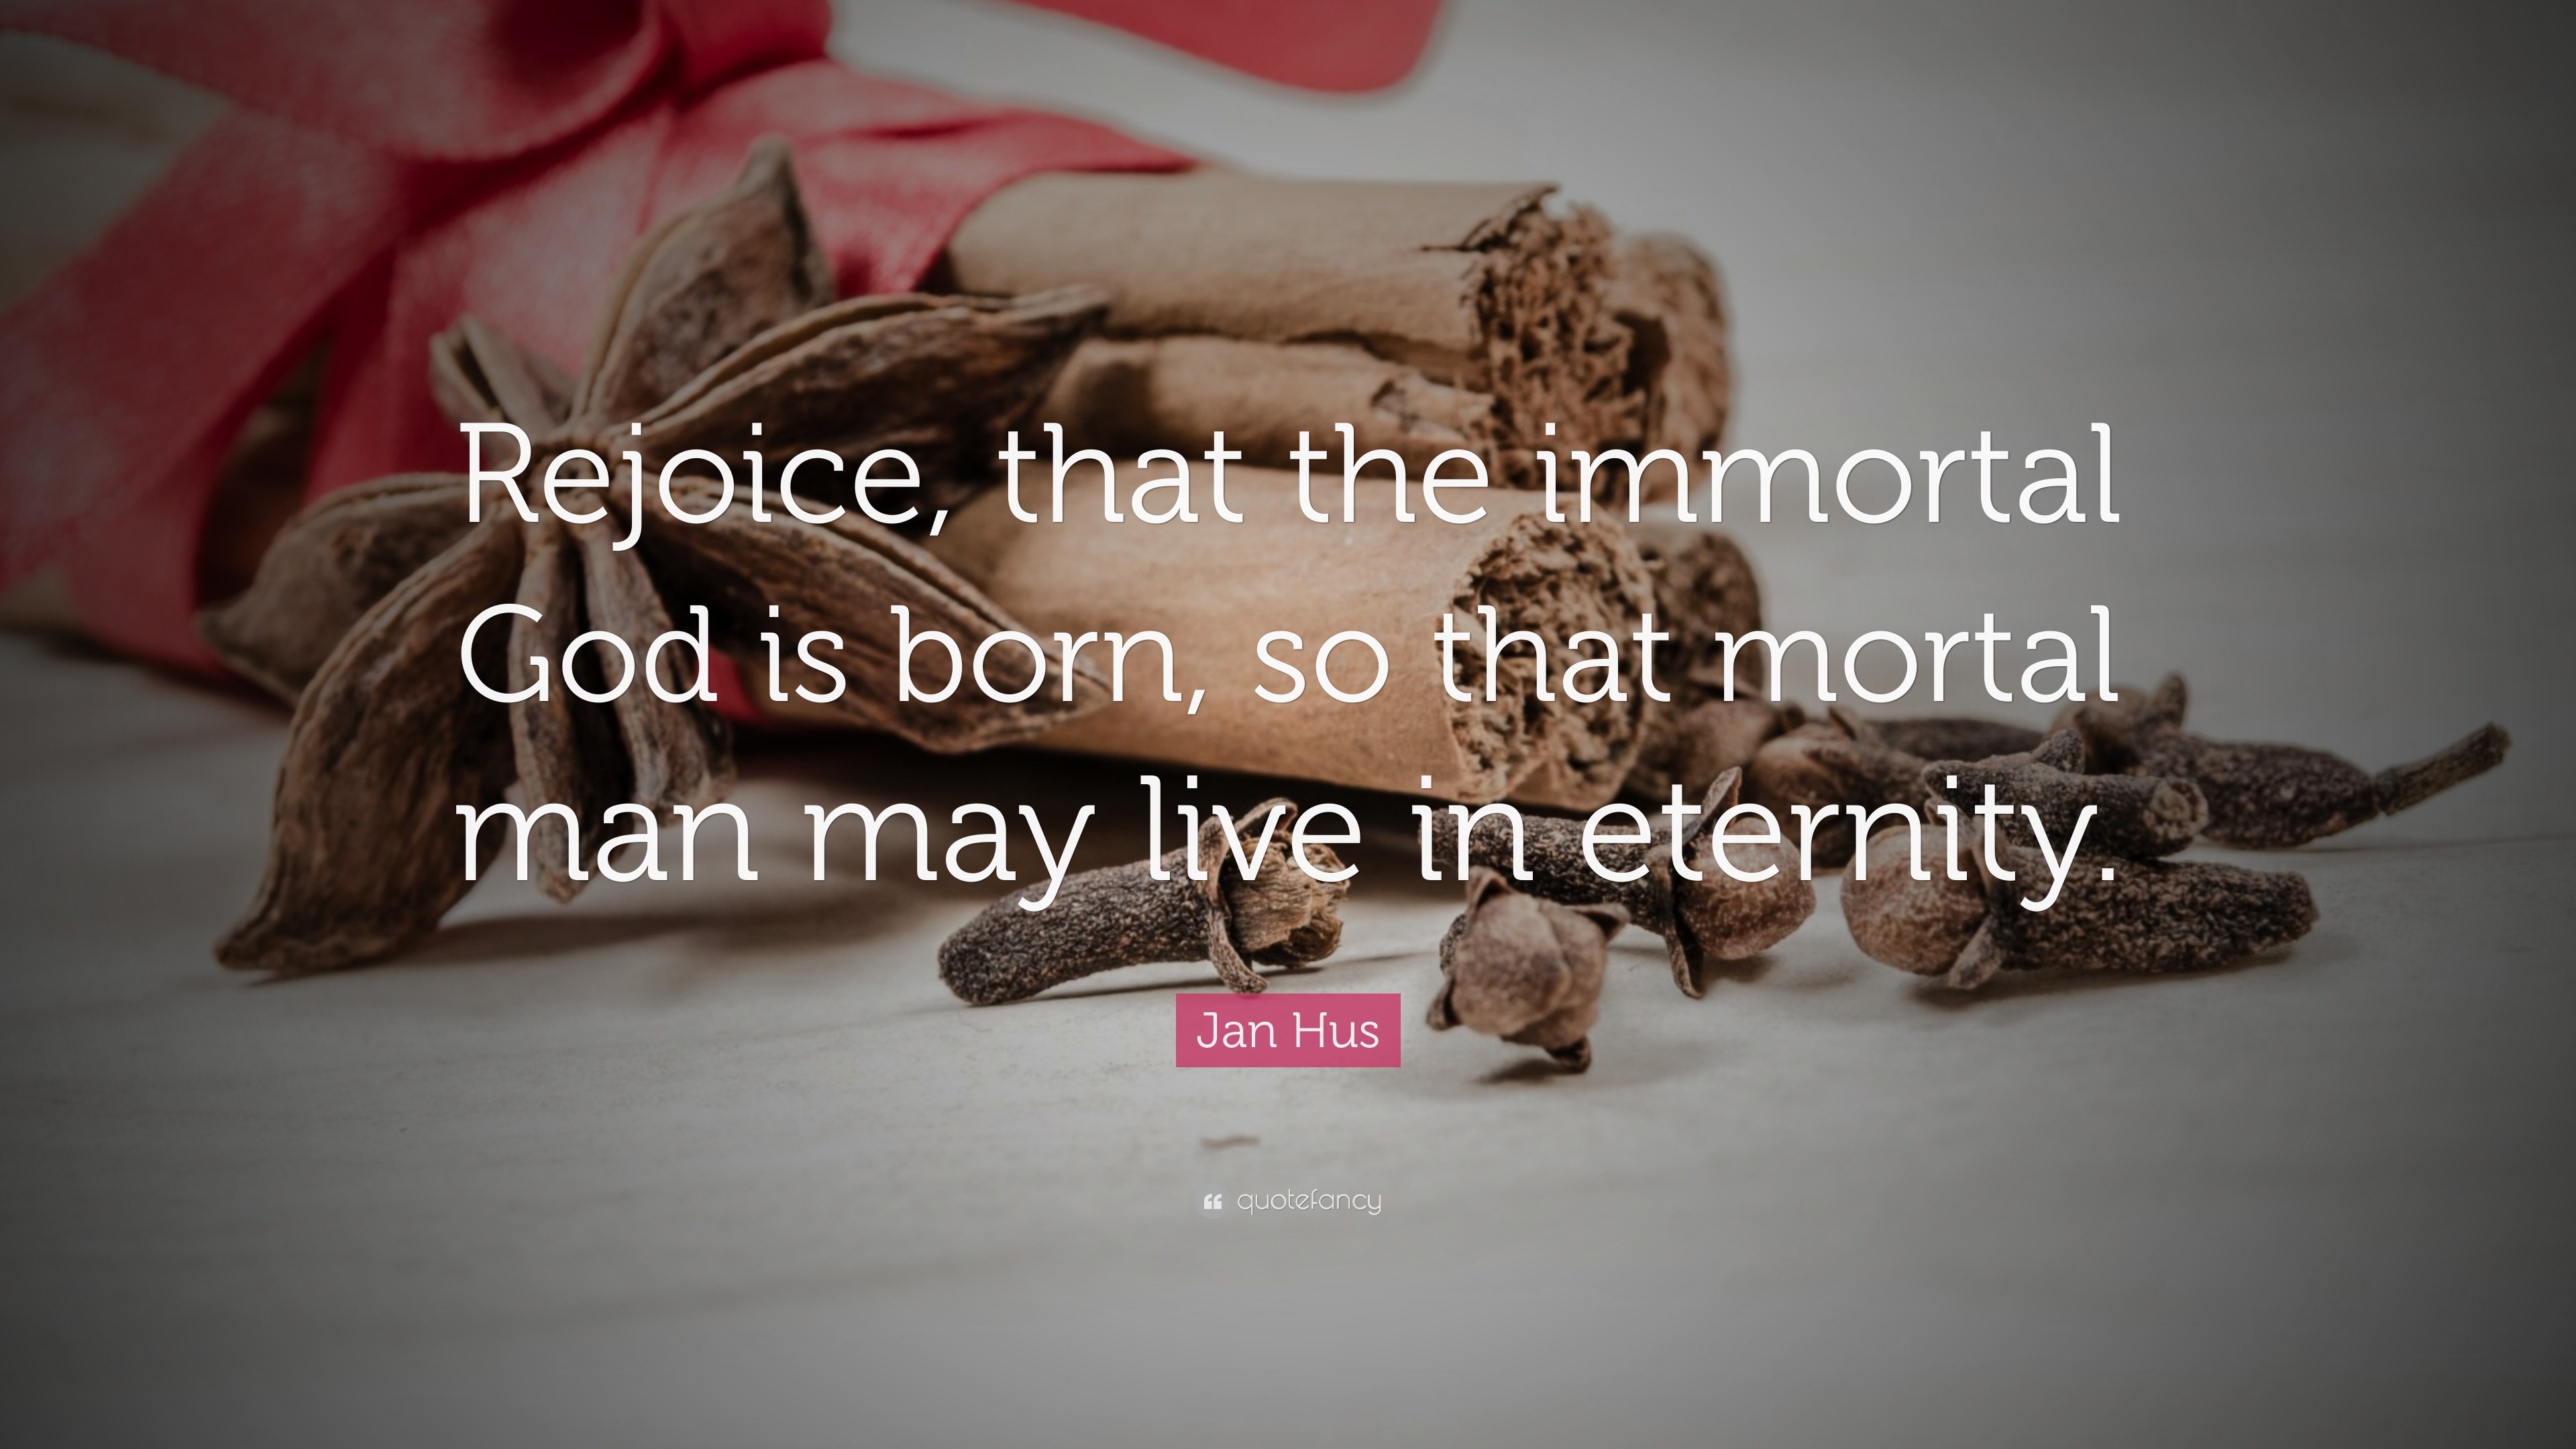 Jan Hus Quote “Rejoice that the immortal God is born so that